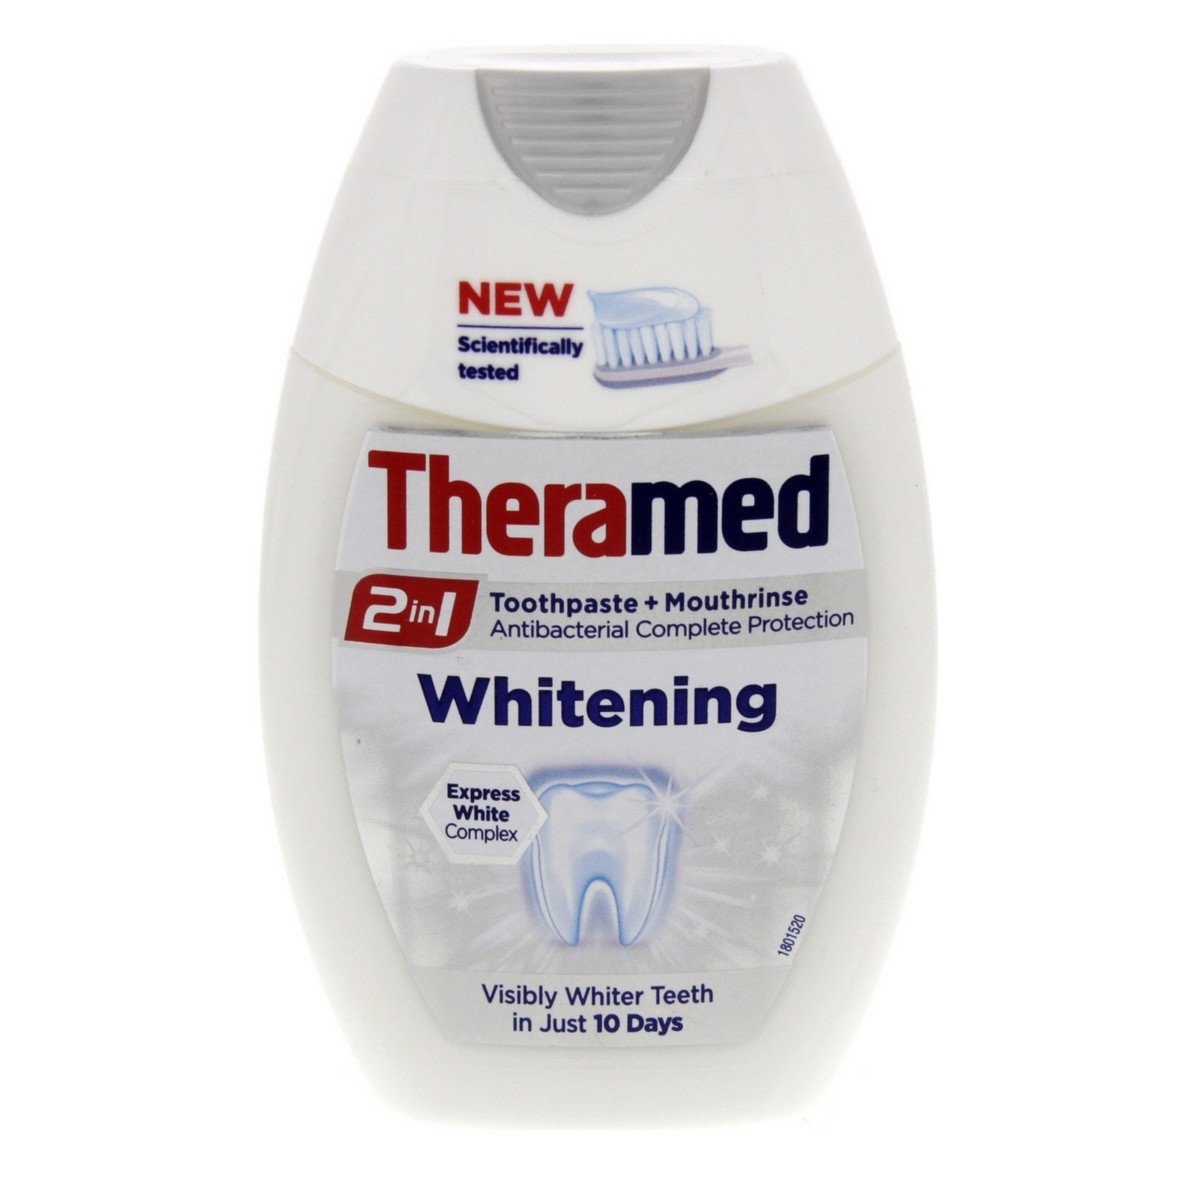 Theramed Whitening Toothpaste 2in1 75 ml